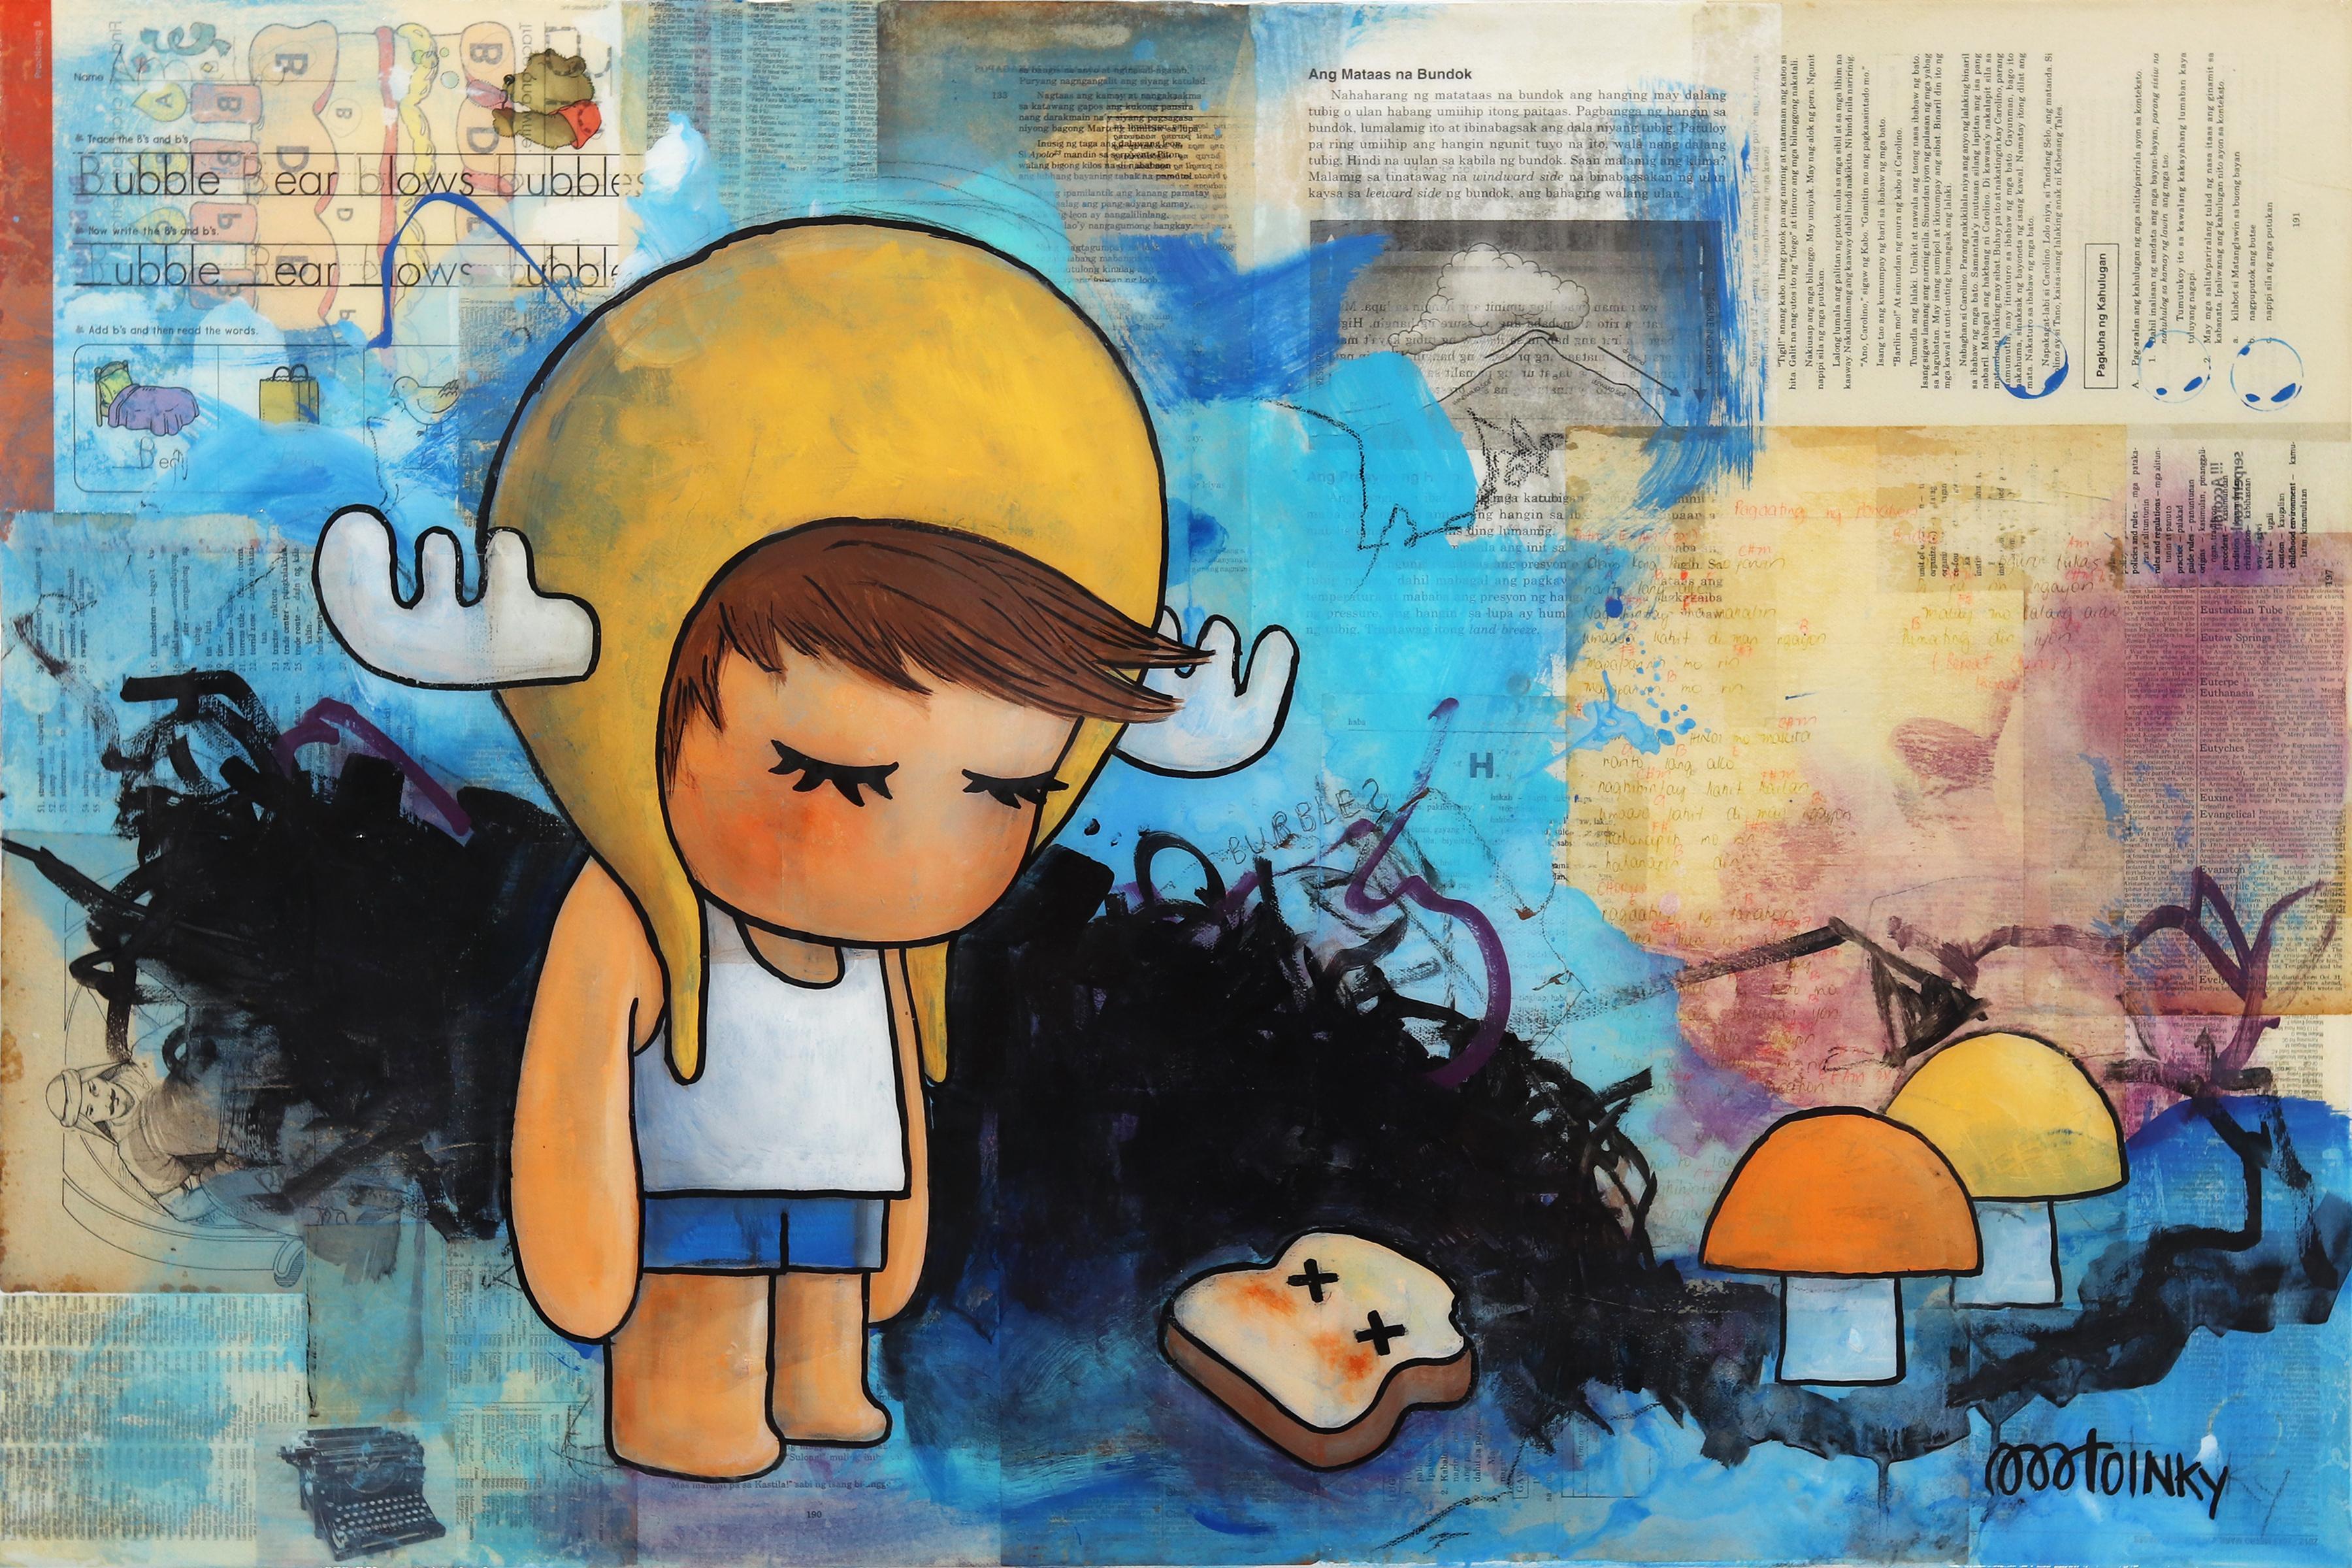 Melanie Tiongson Figurative Painting - The Sad One - Original Mixed Media Painting inspired by Filipino Folklore